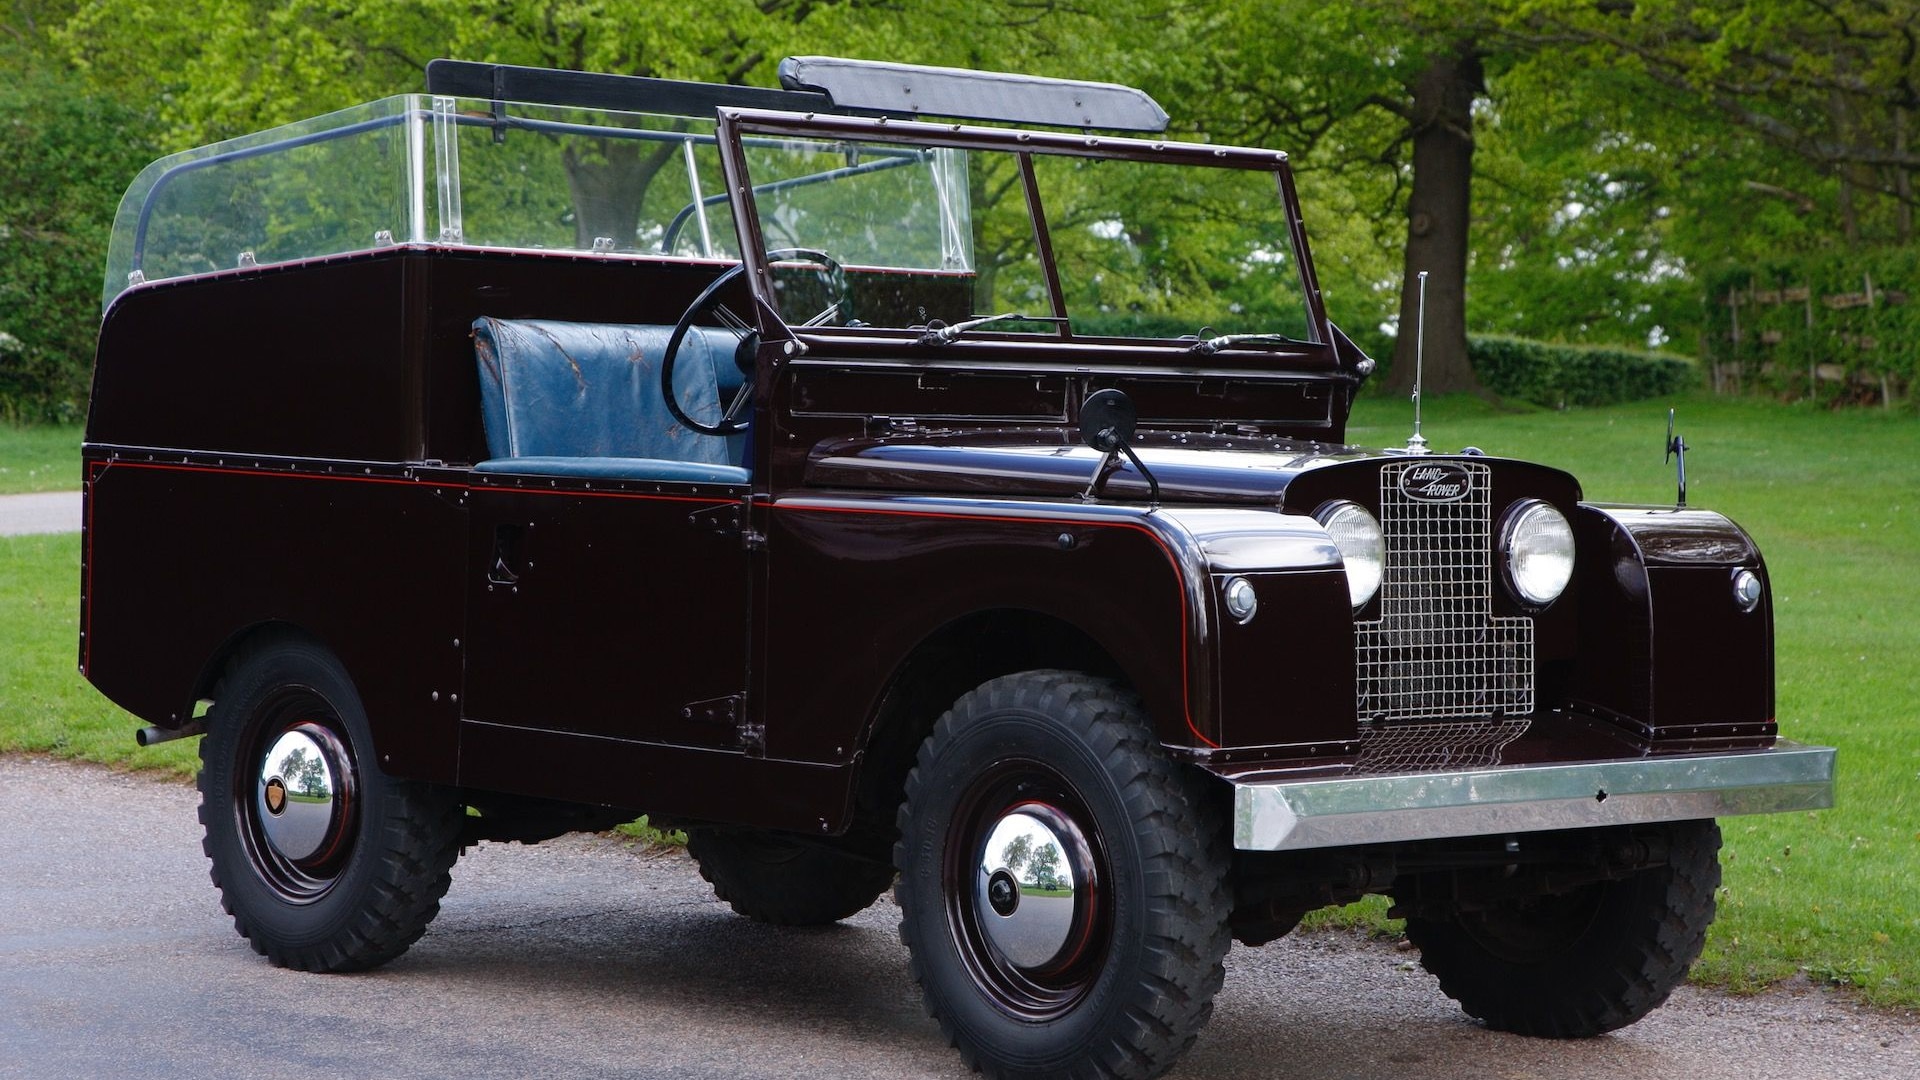 1954 Land Rover Series I state review vehicle used by Queen Elizabeth II